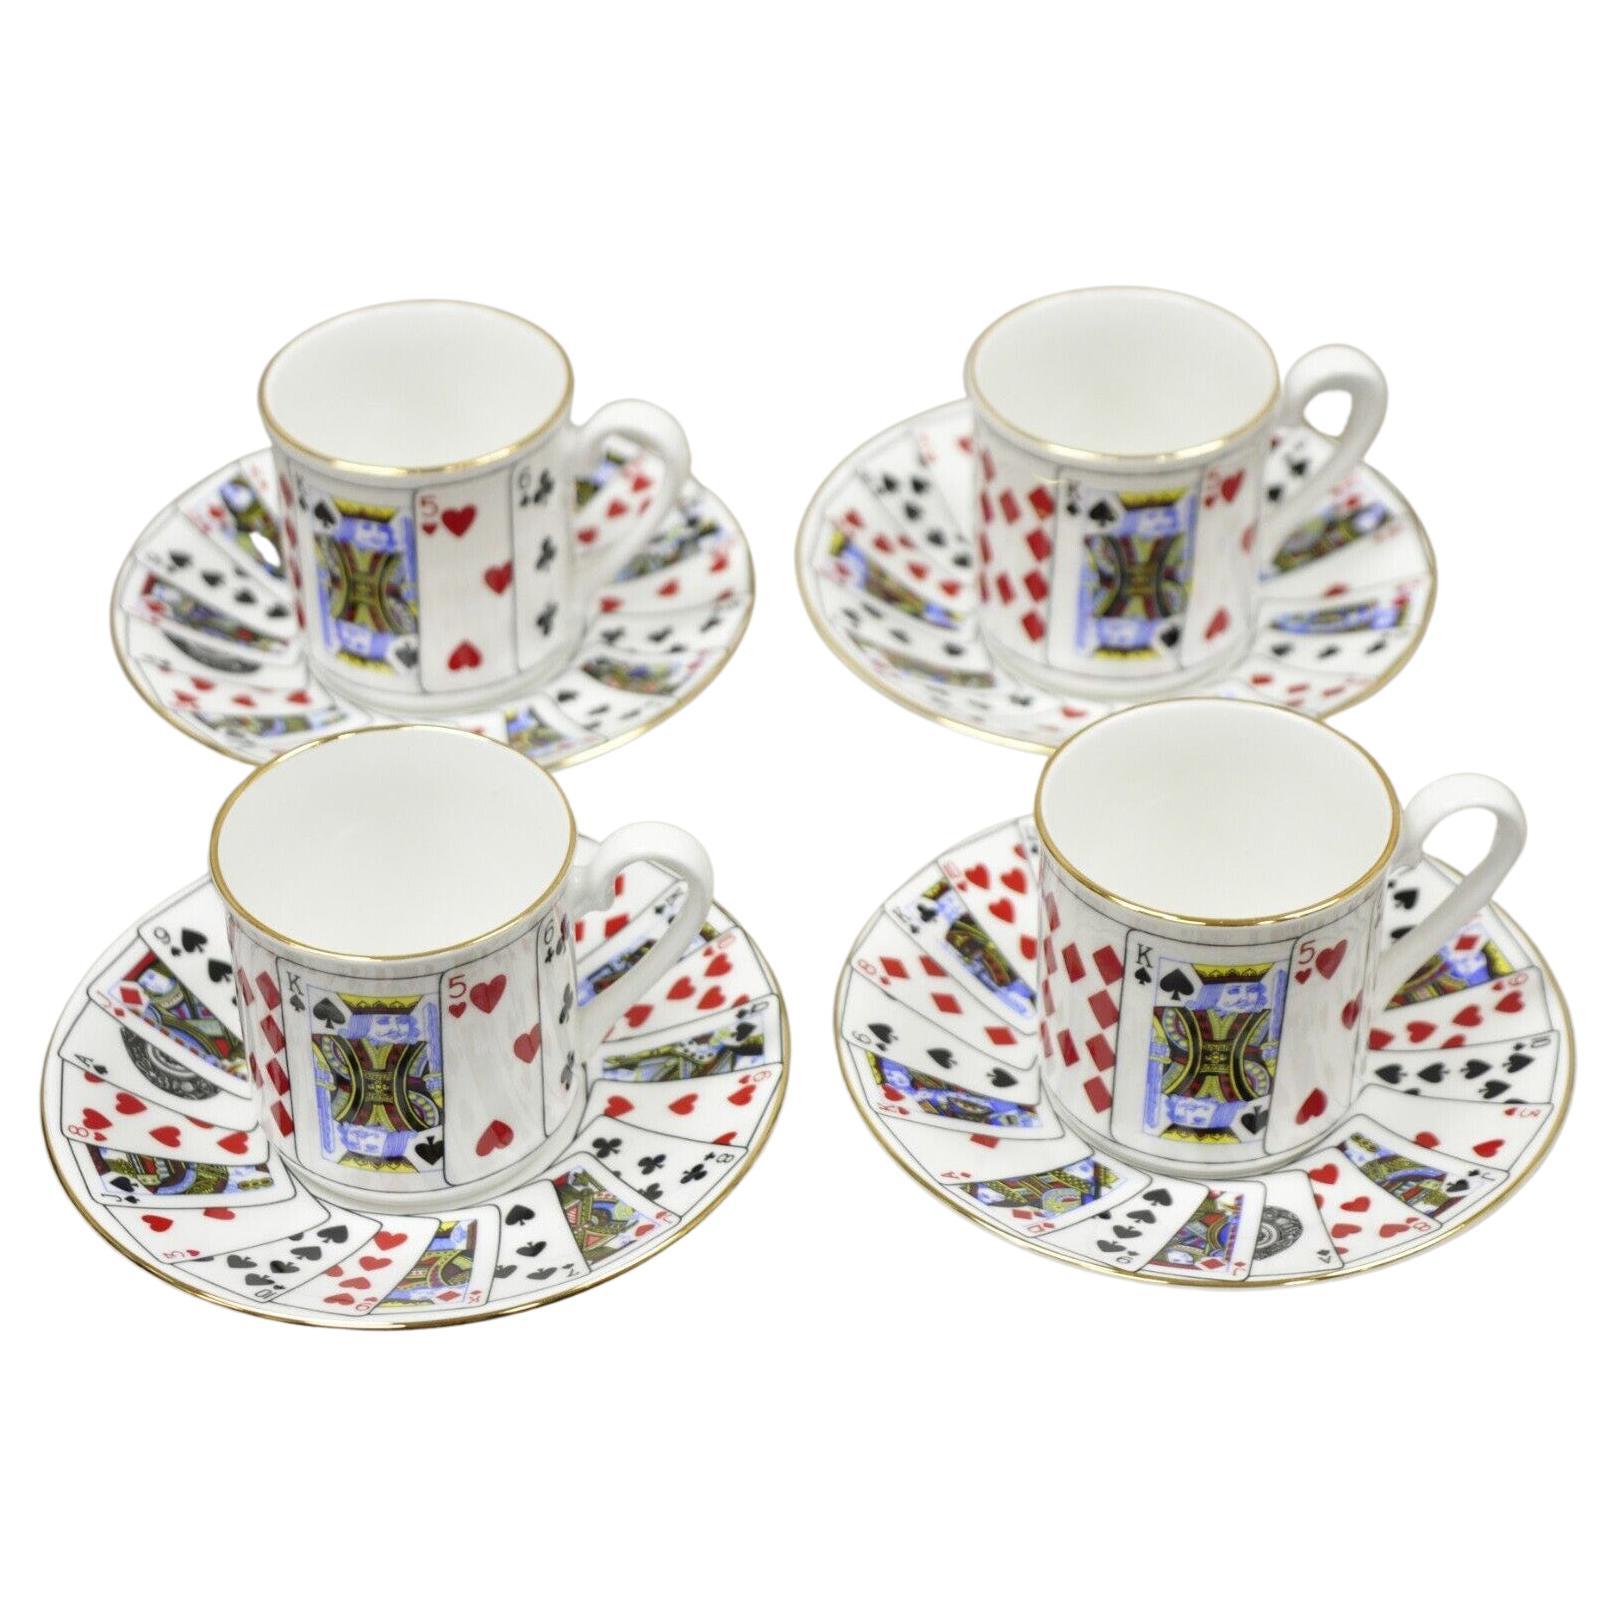 Tiffany & Co Staffordshire Playing Cards Demitasse Tea Cup & Saucer, Set of 4